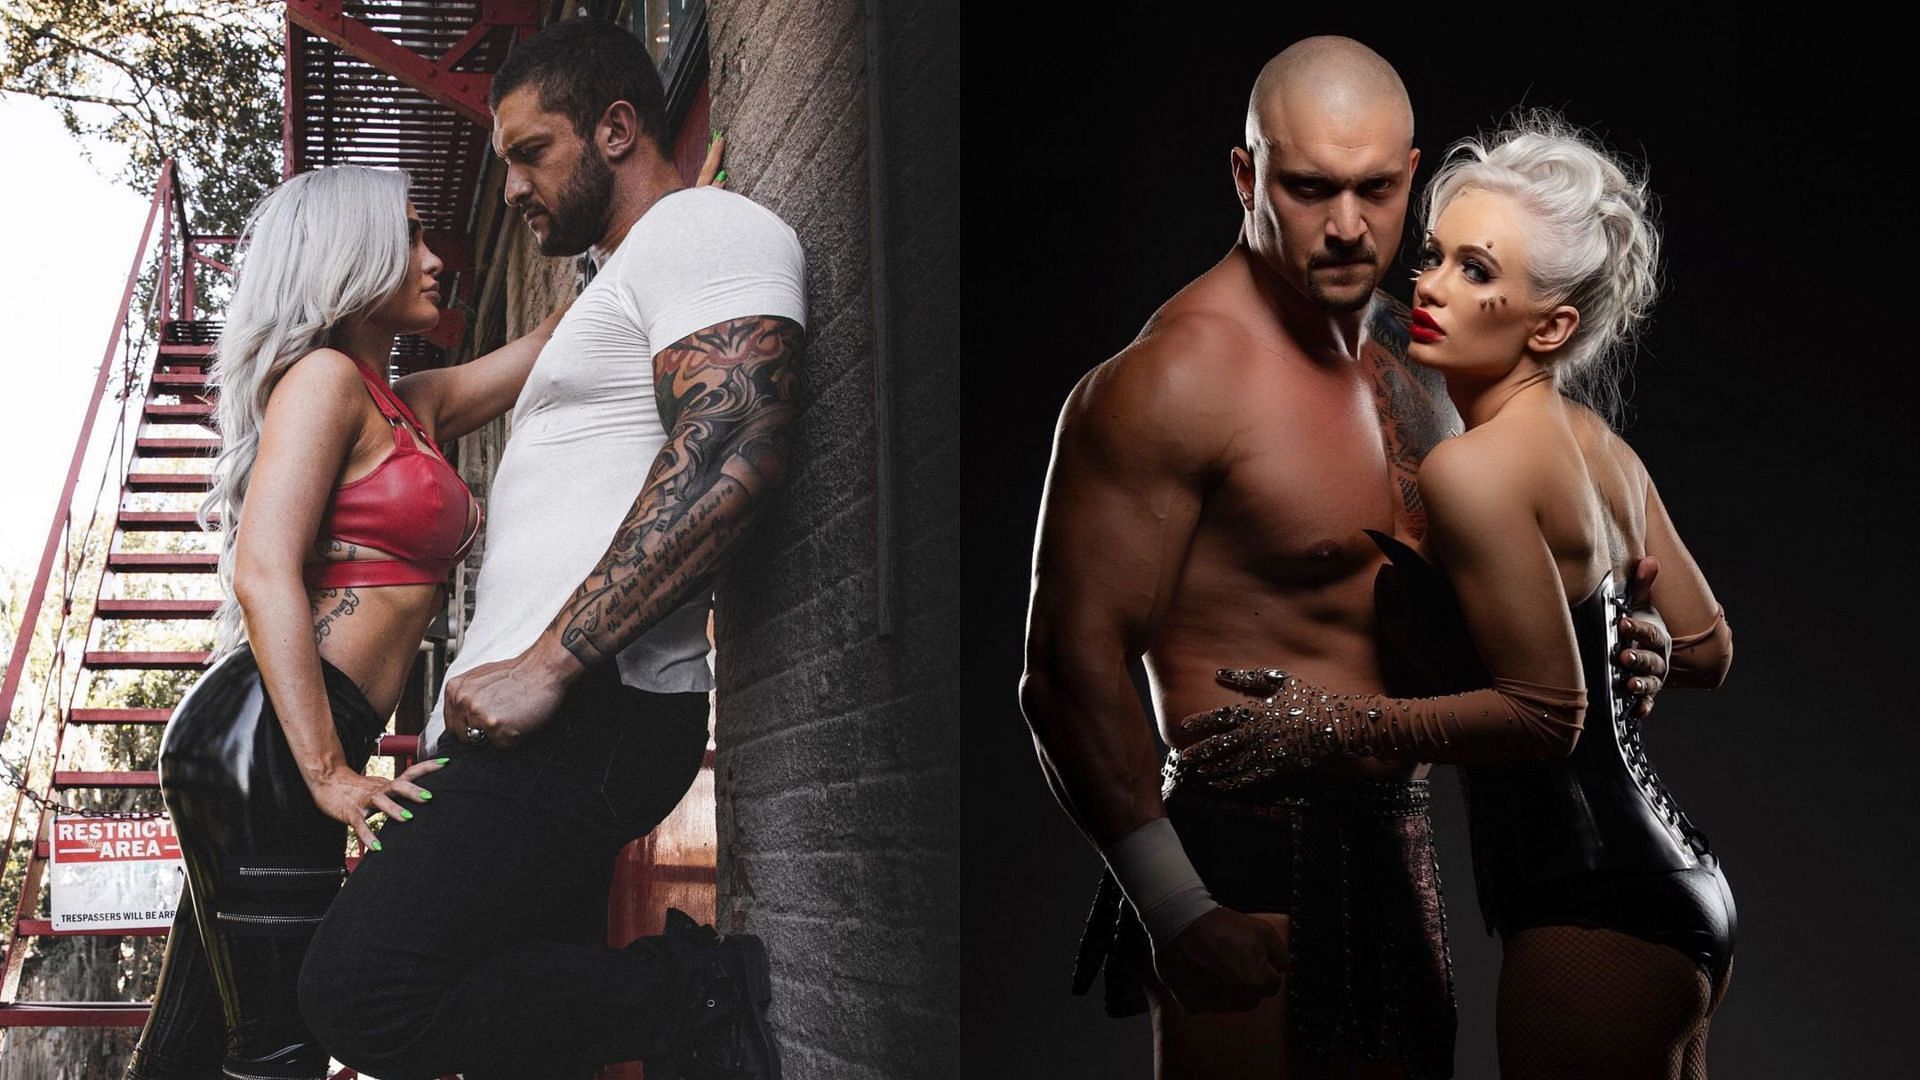 Scarlett made the first move in her relationship with Karrion Kross